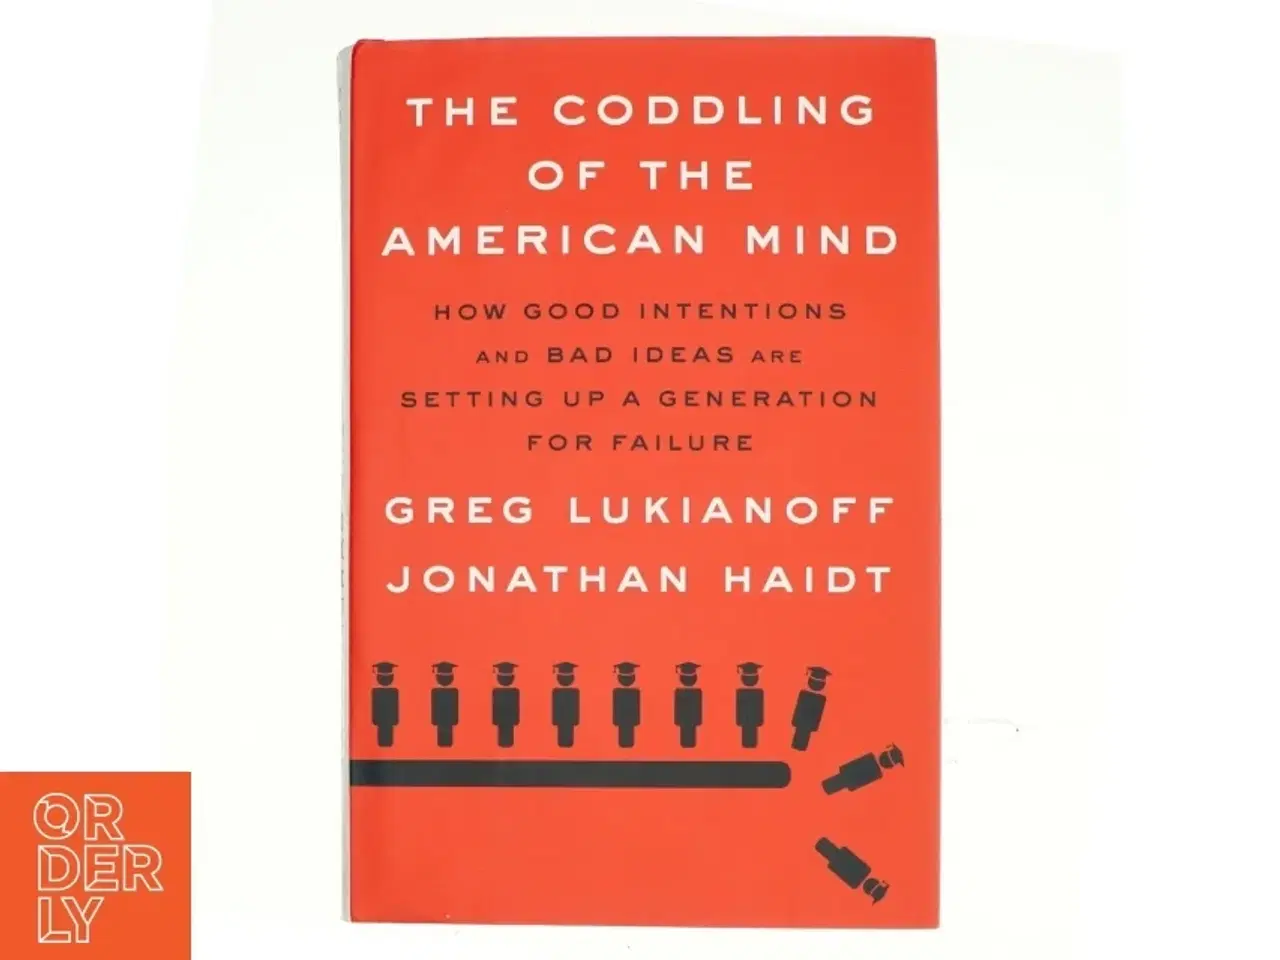 Billede 1 - The coddling of the American mind : how good intentions and bad ideas are setting up a generation for failure af Greg Lukianoff (Bog)